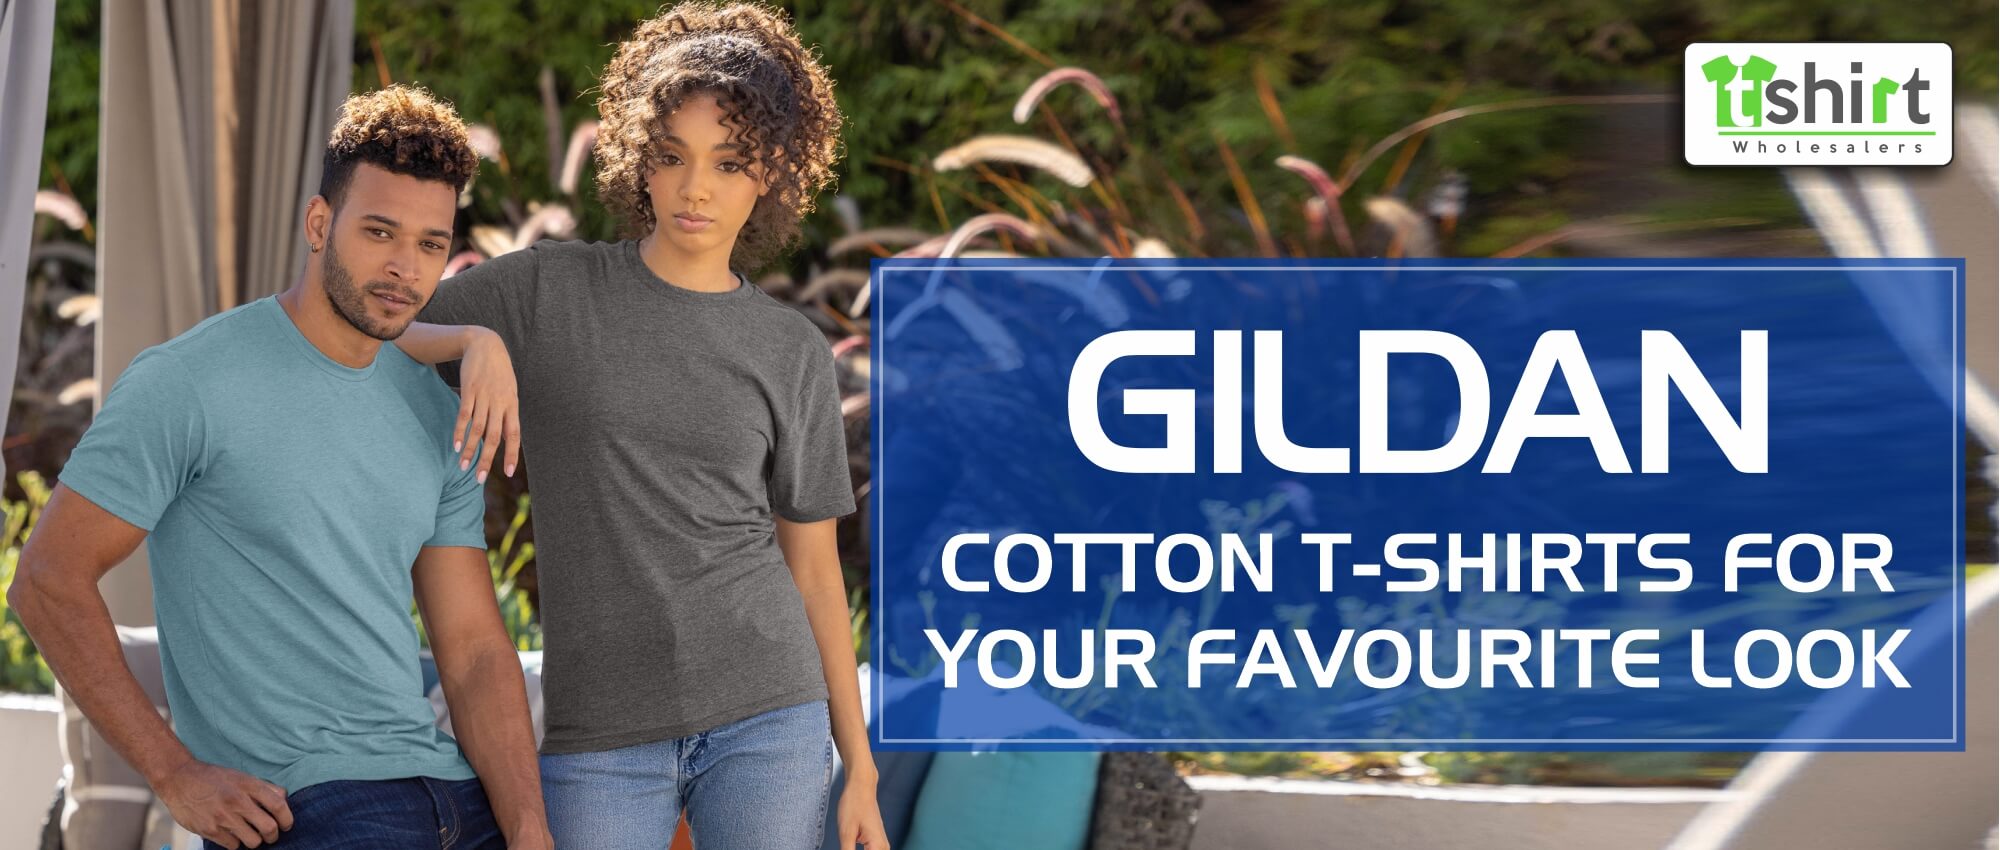 GILDEN COTTON T-SHIRTS FOR YOUR FAVOURITE LOOK